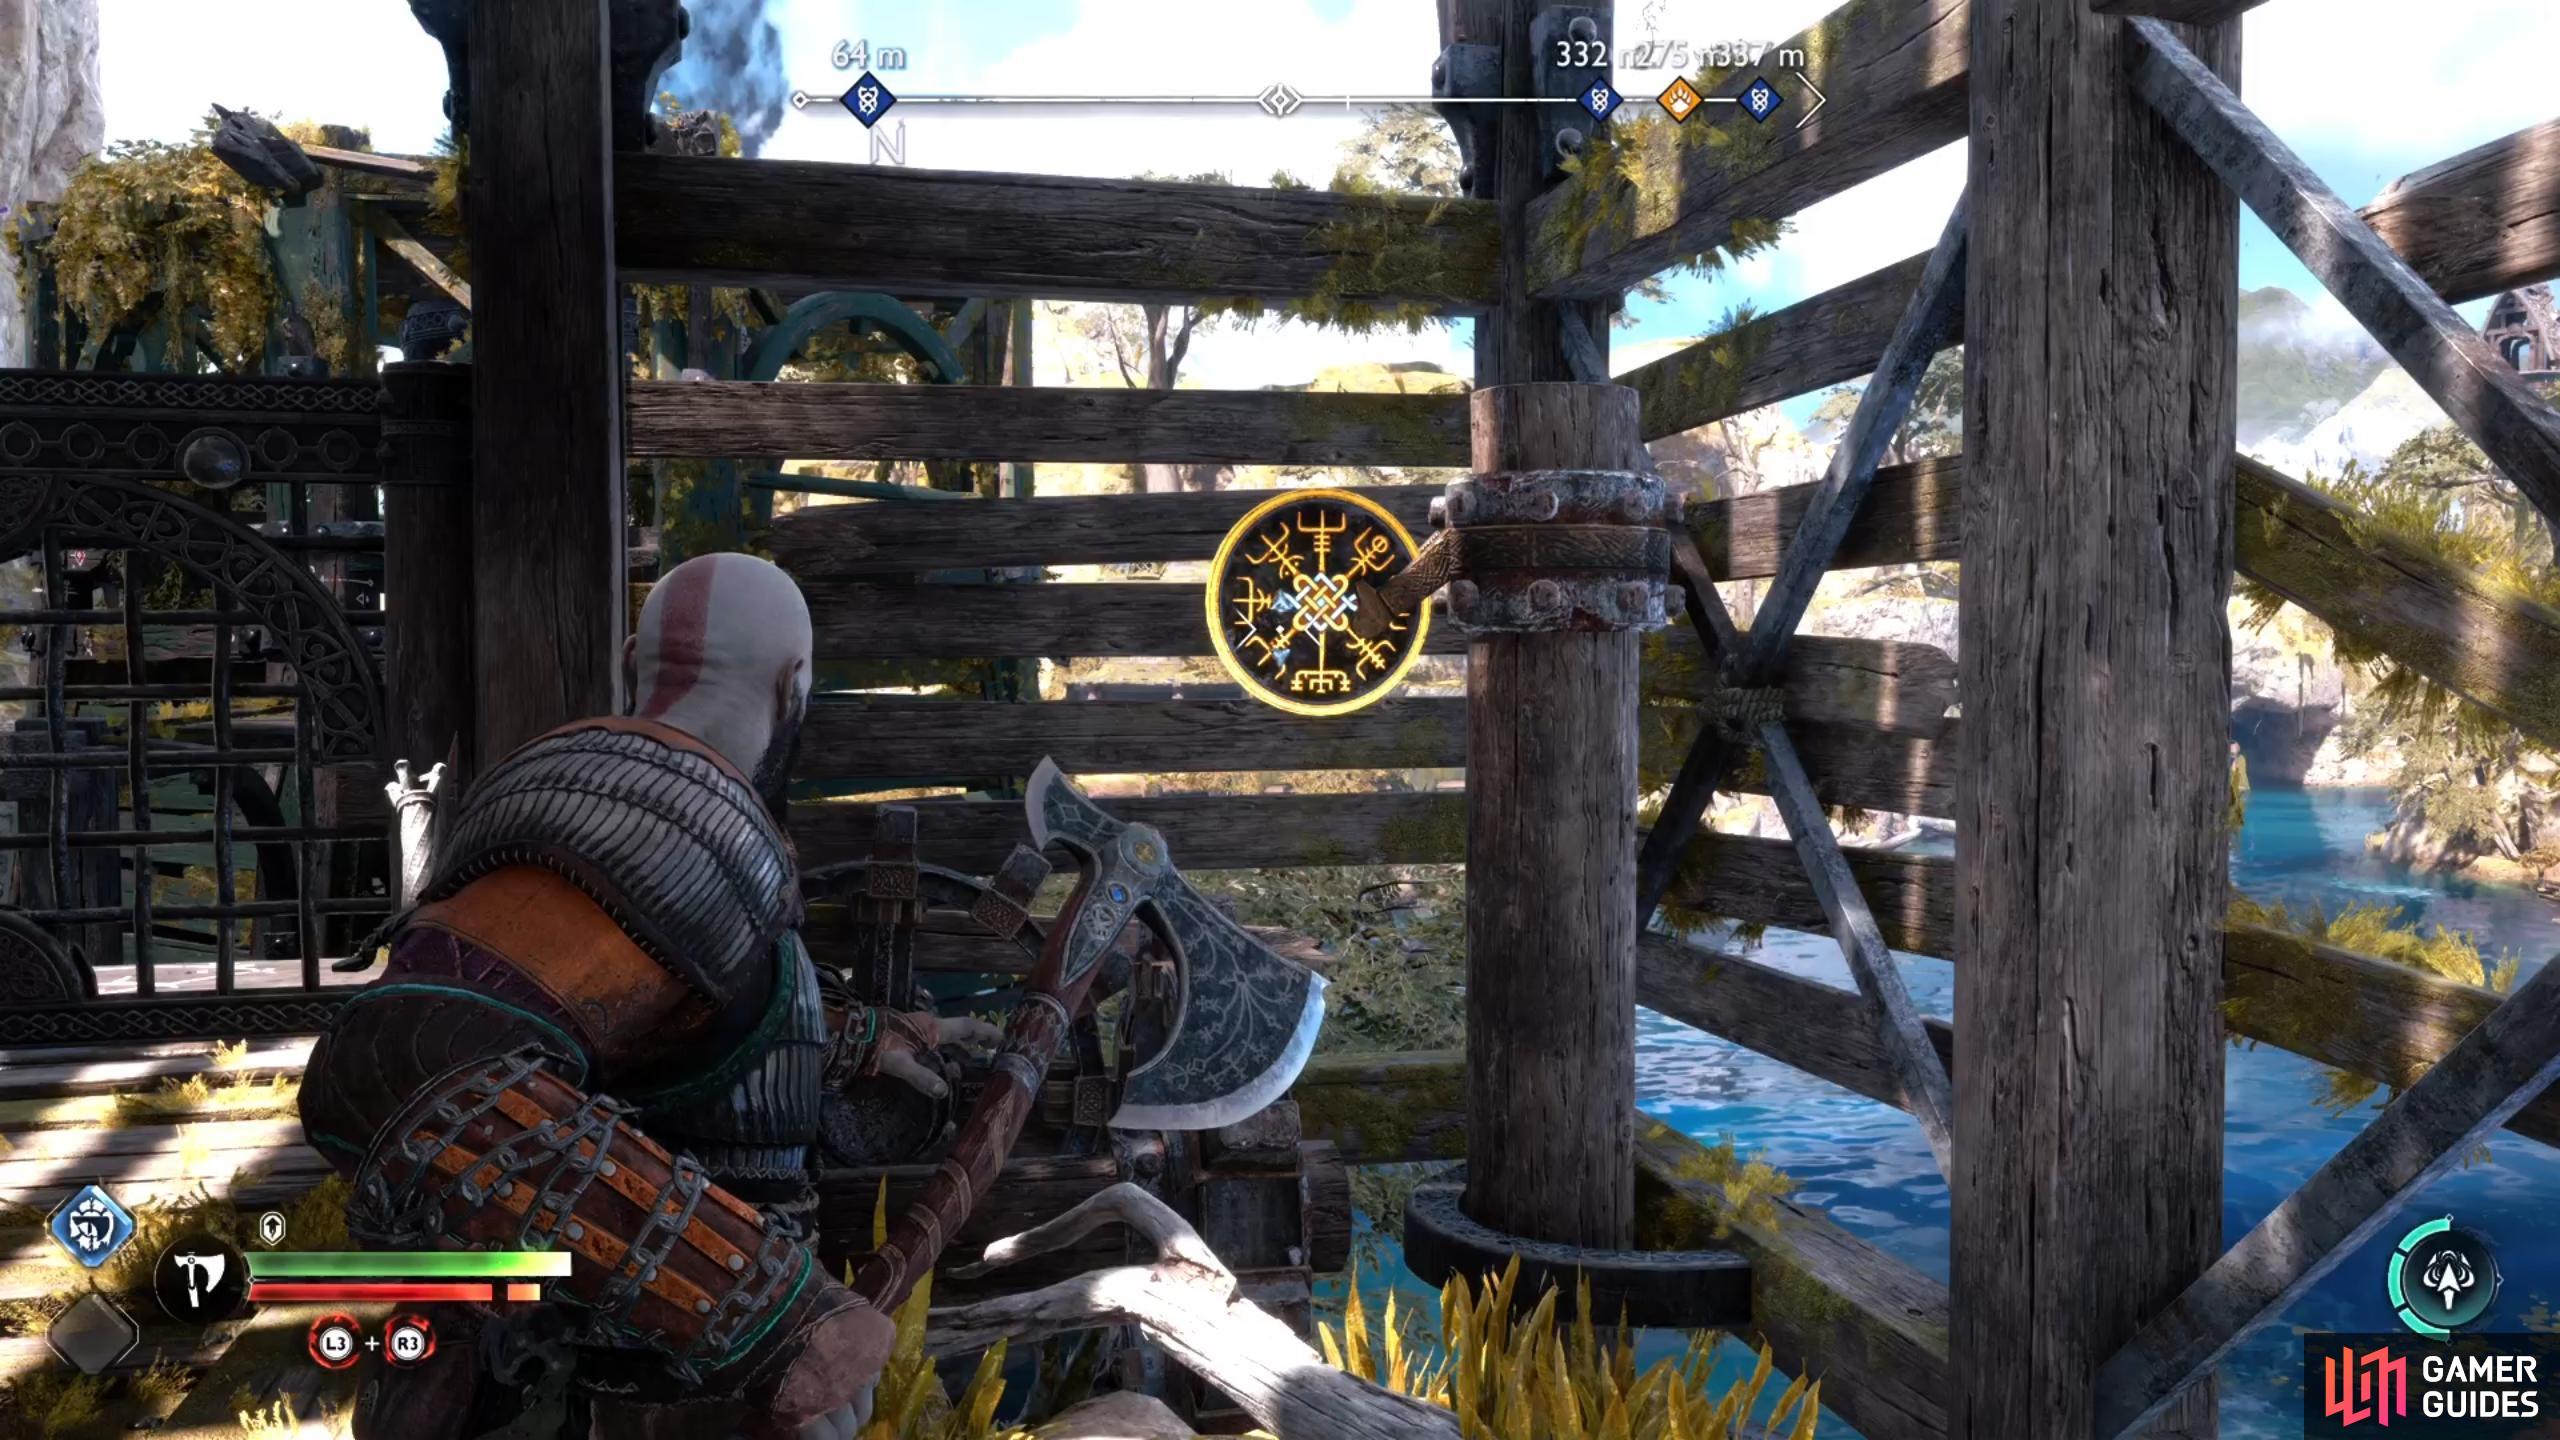 You can hit the spinning wheel to lower the gate here.